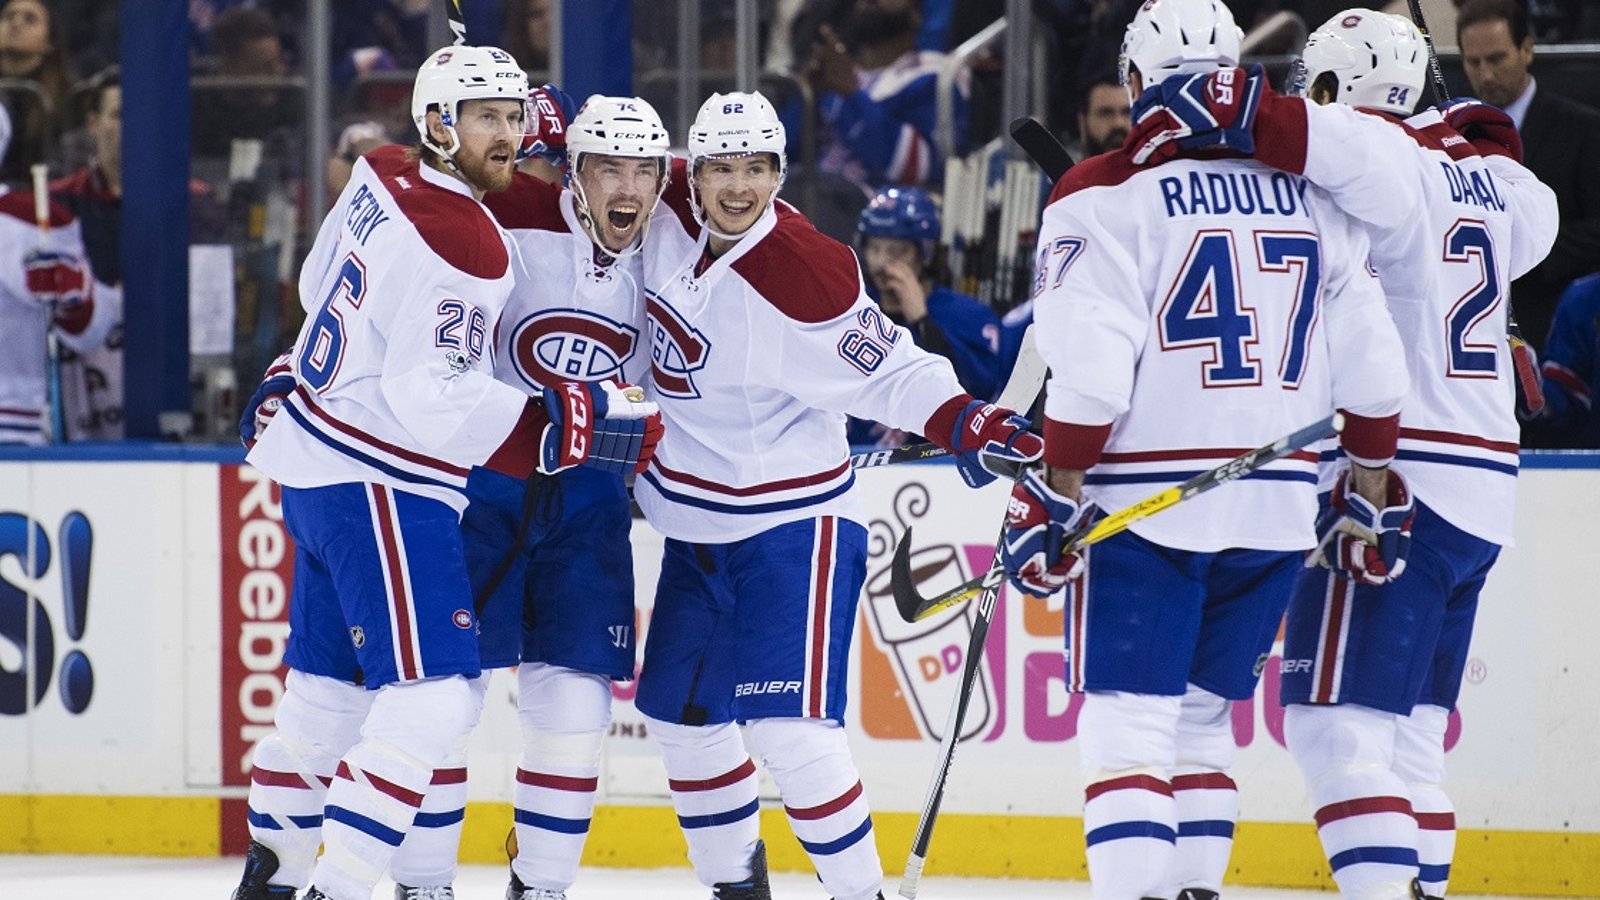 Report: Habs confirm defenseman has had surgery, long road to recovery.